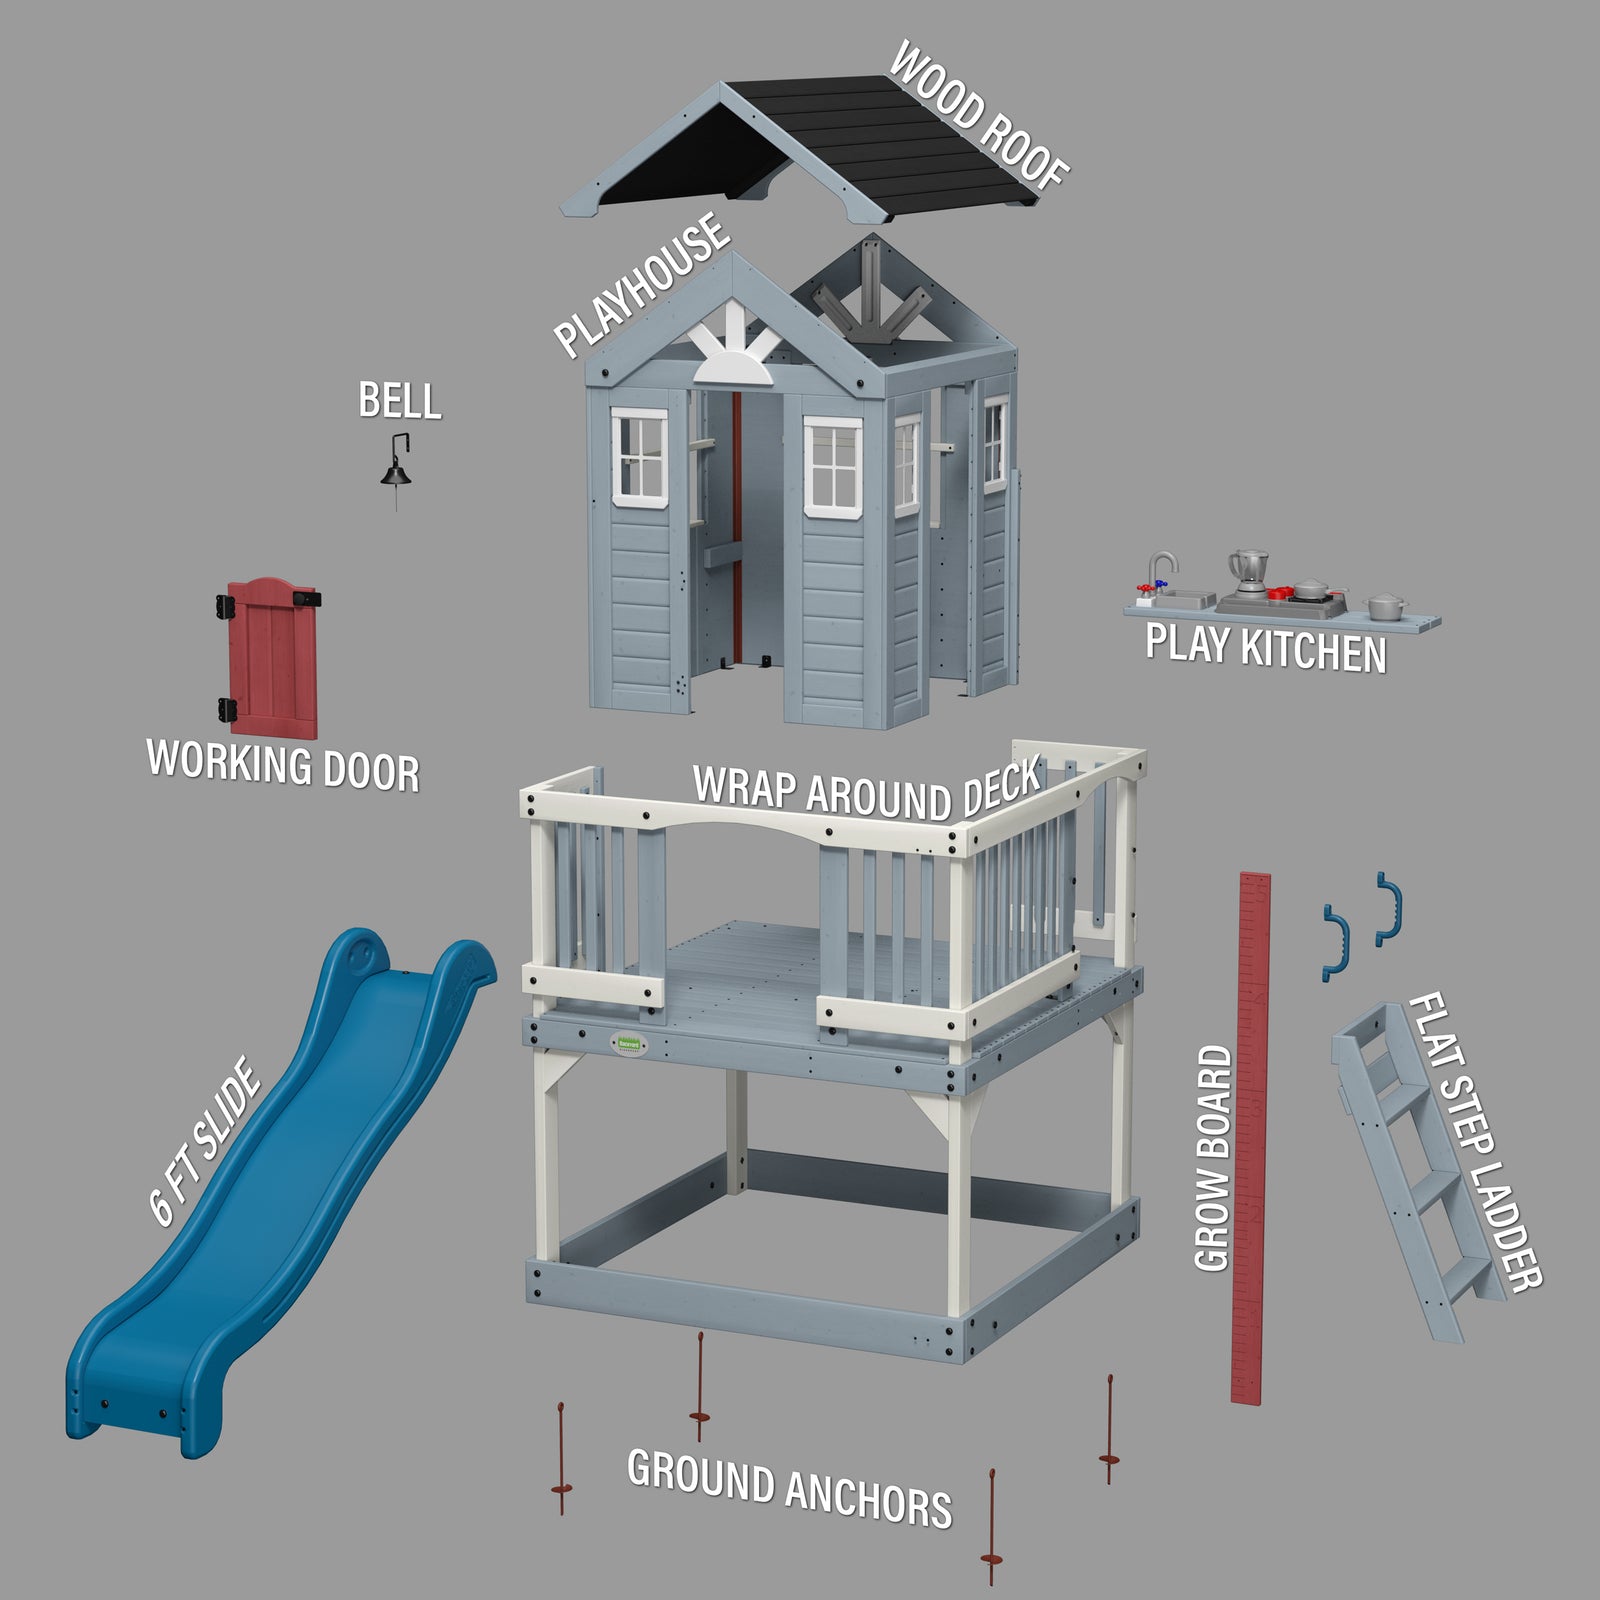 Load image into Gallery viewer, Beacon Heights Playhouse Exploded View
